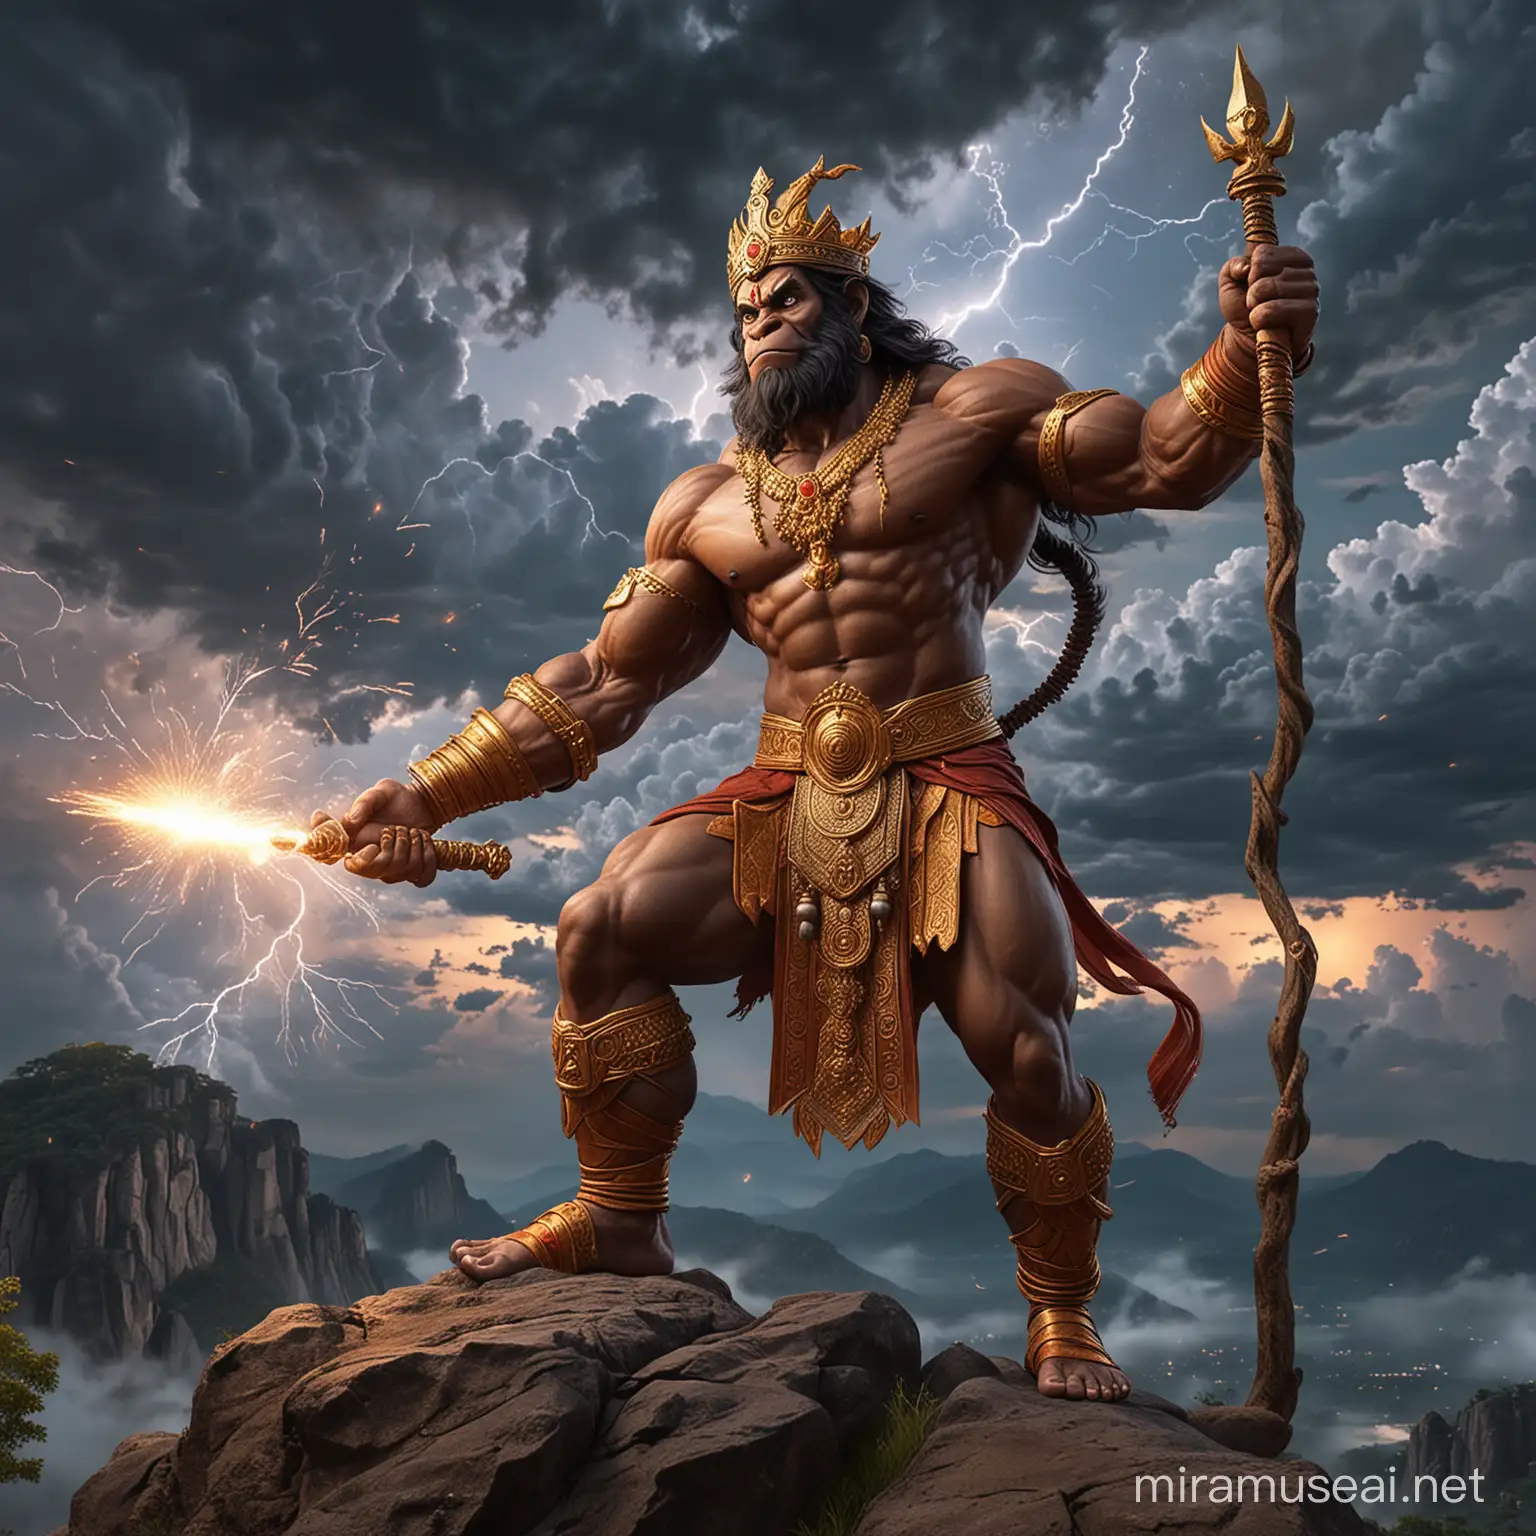 God Hanuman very muscular, tall, holding a huge Golden mace bomb in right hand pointing to the sky, wearing golden crown, standing on a hill top, one leg stepping on a big rock, battle field in the background, detailed and intricate environment, dynamic pose, muscles defined with chiseled aesthetics, traditional attire draped elegantly, vivid, ultra realistic.

Thunders roar and lightning dances in the sky, painting it with wild, vibrant colors. Each bolt of electricity illuminates the darkness, revealing the intricate patterns of clouds swirling like celestial brushstrokes. The rumble of thunder echoes through the air, shaking the earth beneath with its power. Nature's own fireworks display, a spectacle sky.
